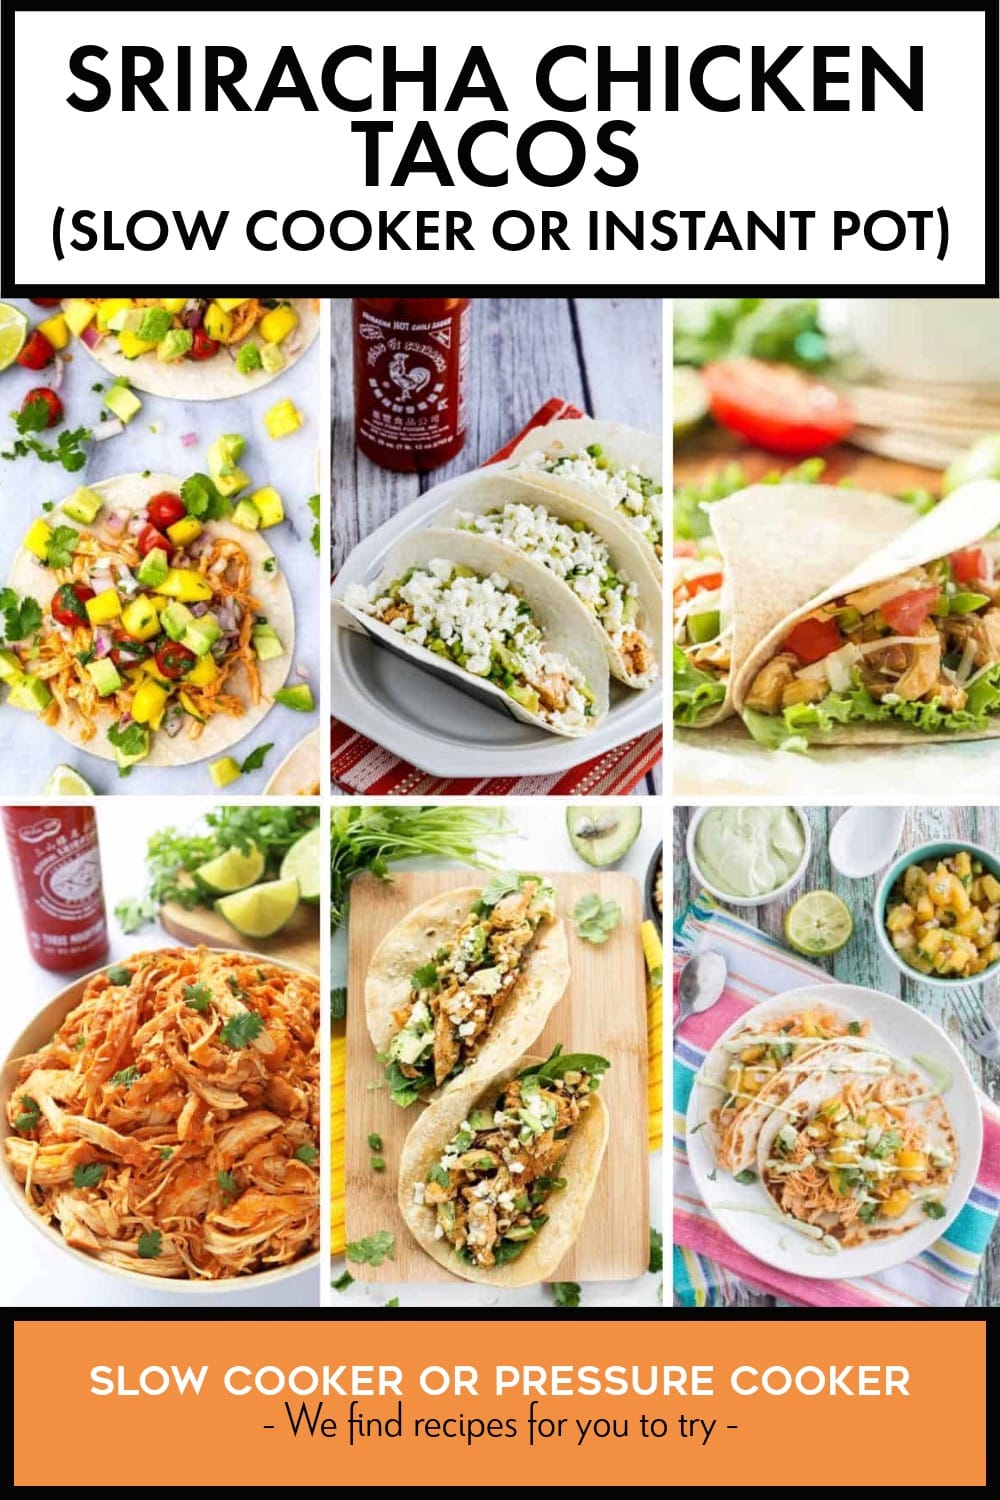 Pinterest image of Sriracha Chicken Tacos (Slow Cooker or Instant Pot)